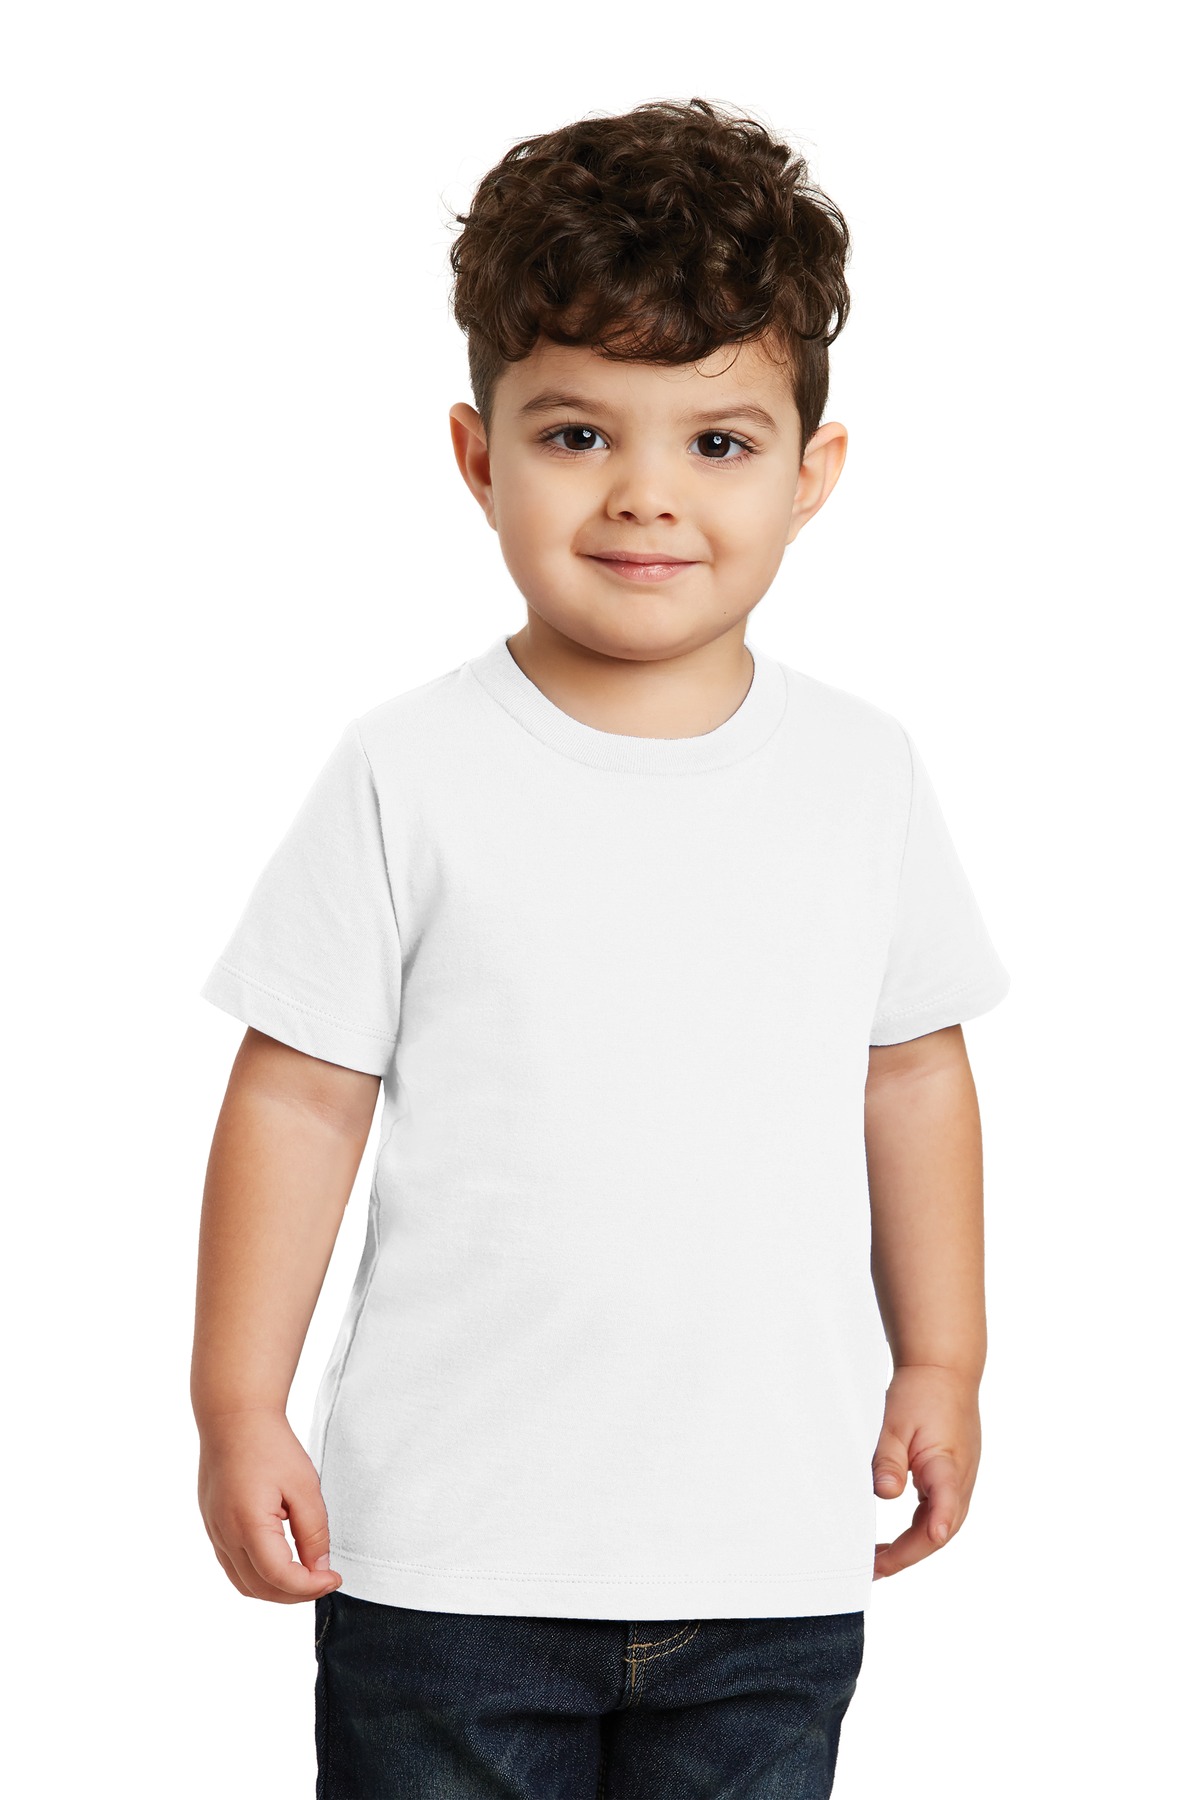 Port & Company Hospitality Youth Infant & Toddler,TShirts ® Toddler Fan Favorite Tee.-Port & Company